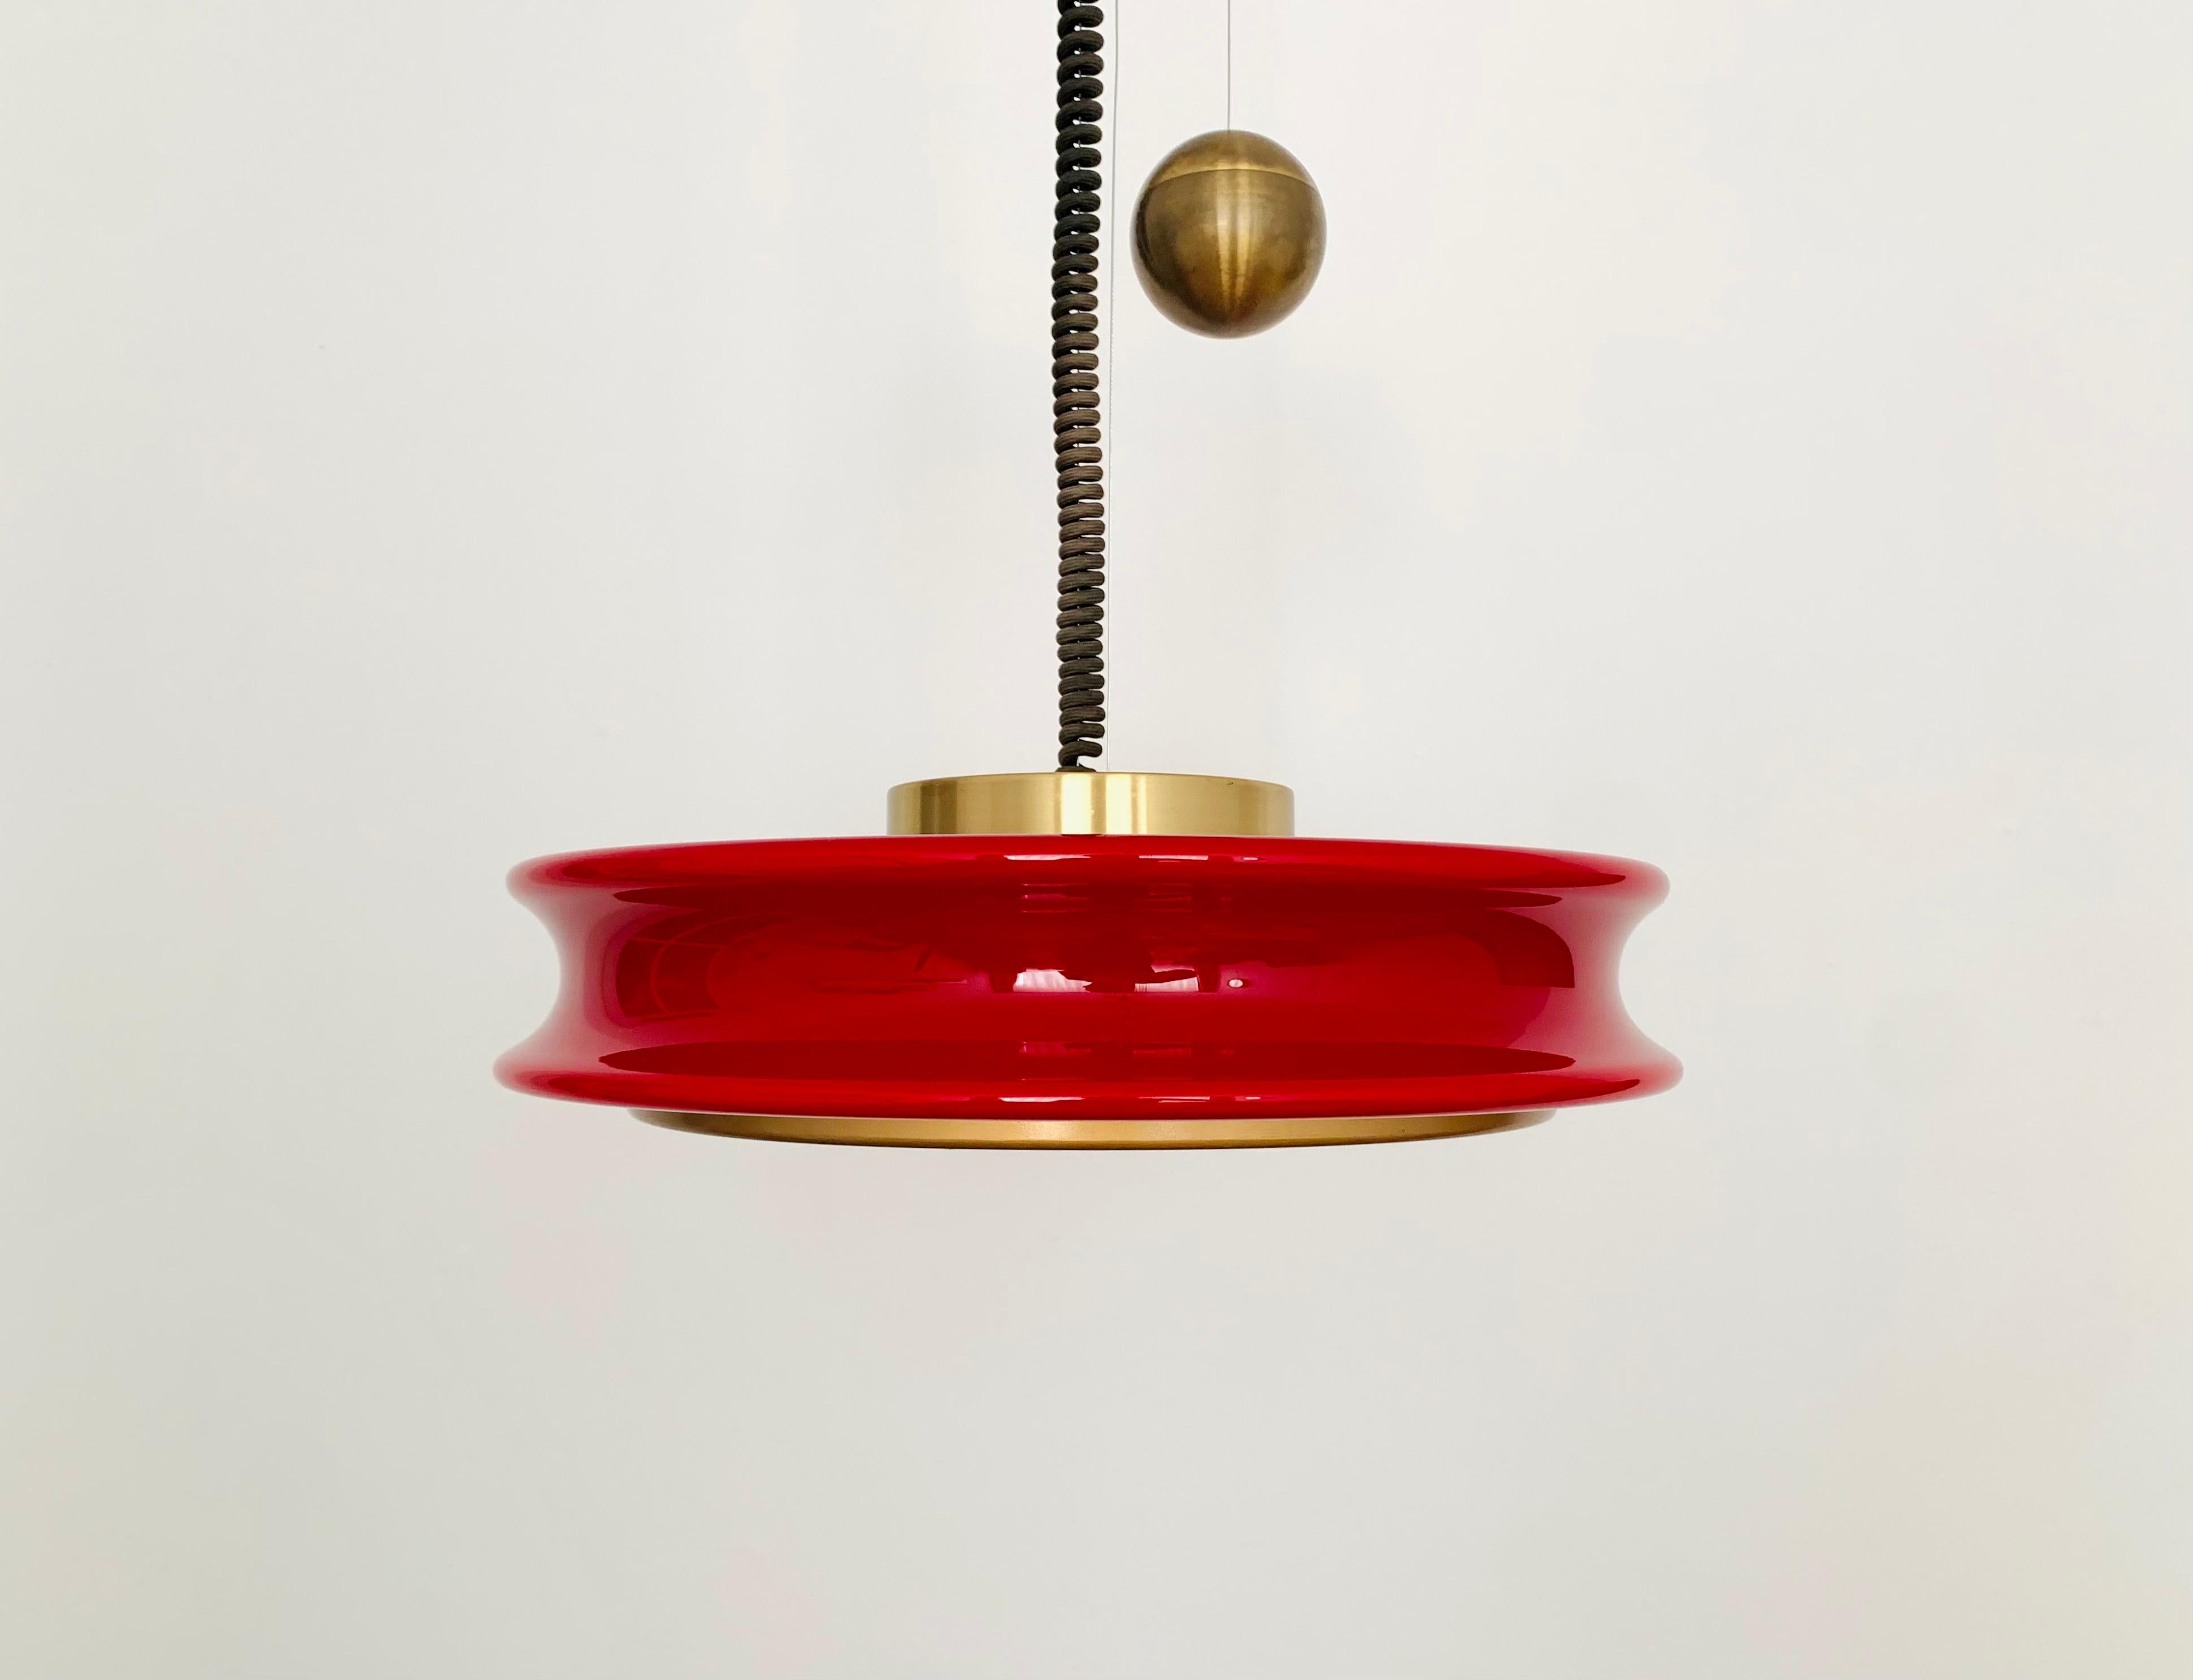 Extremely impressive Orion pendant lamp from the 1960s.
Exceptional design and a real highlight for every design lover.
The lighting effect of the lamp is extremely beautiful.
The red glass has an exceptionally beautiful color.
Very high quality